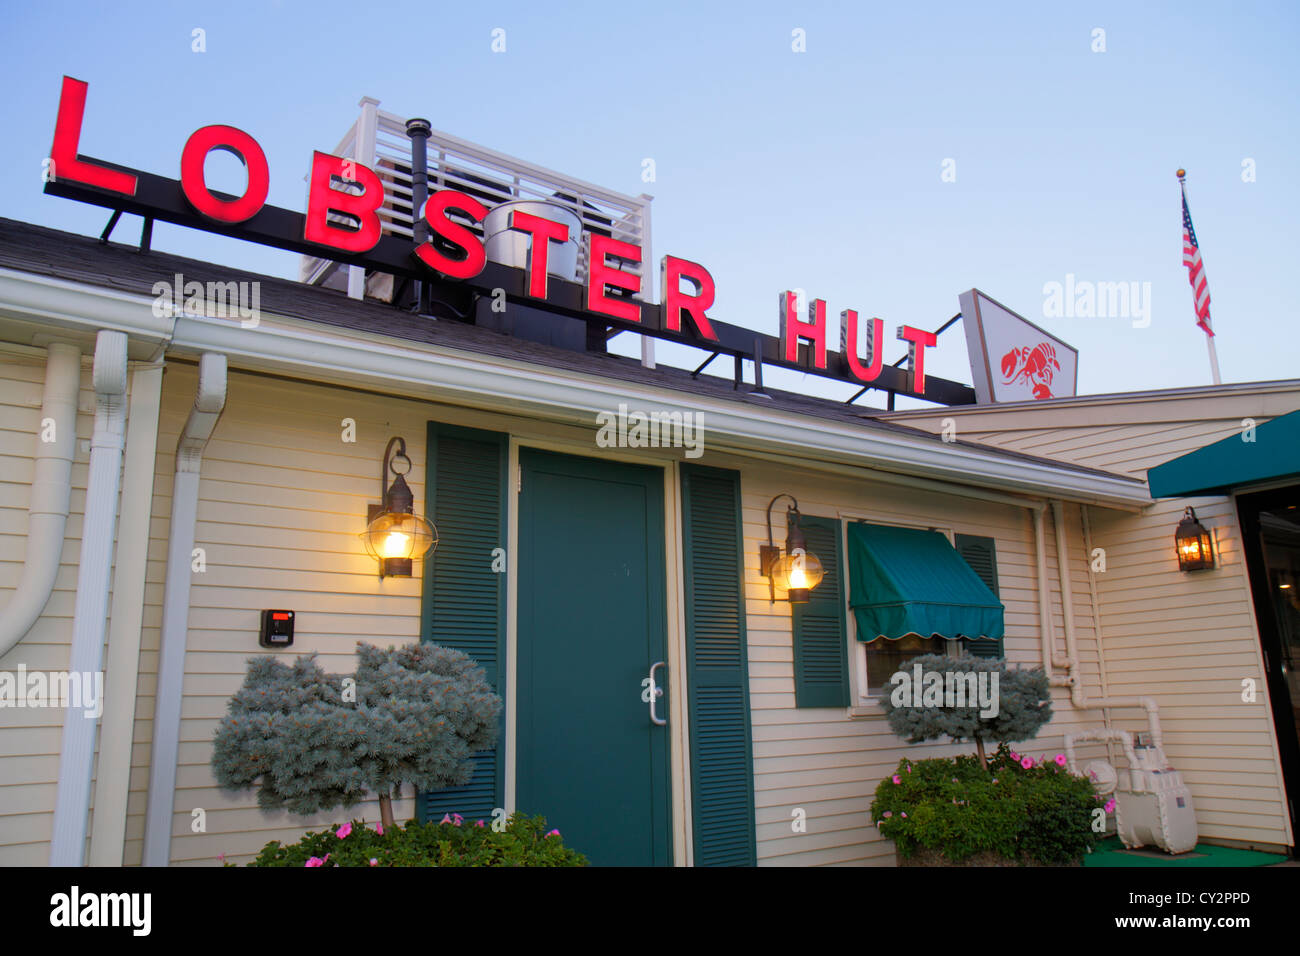 Massachusetts Plymouth,Water Street,Town Wharf,Lobster Hut,restaurant restaurants food dining cafe cafes,seafood,entrance,front,sign,MA120816054 Stock Photo